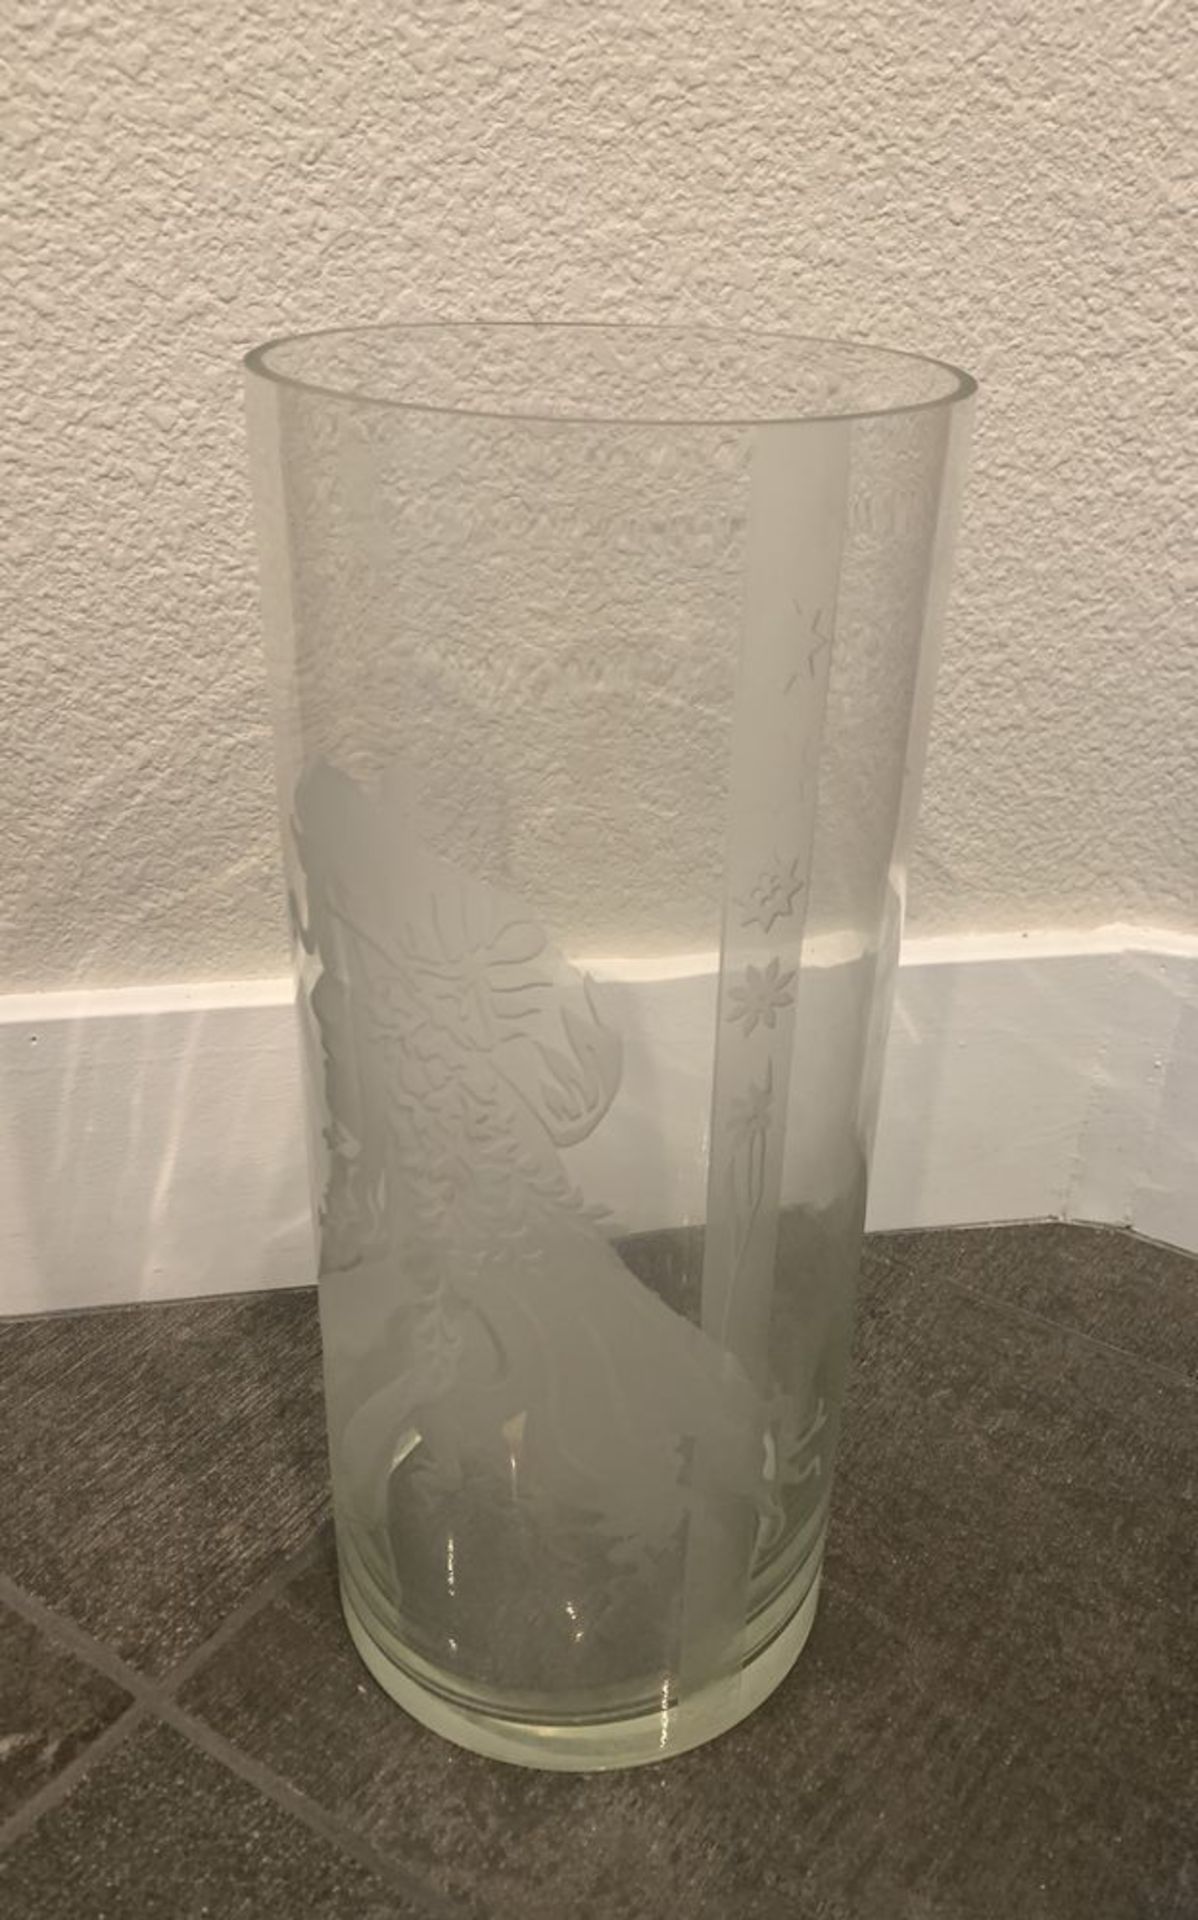 LARGE PERRY COYLE GLASS VASE 24"X 8" WIDE , SIGNED BY ARTIST ORIGINAL PIECE - Image 4 of 5